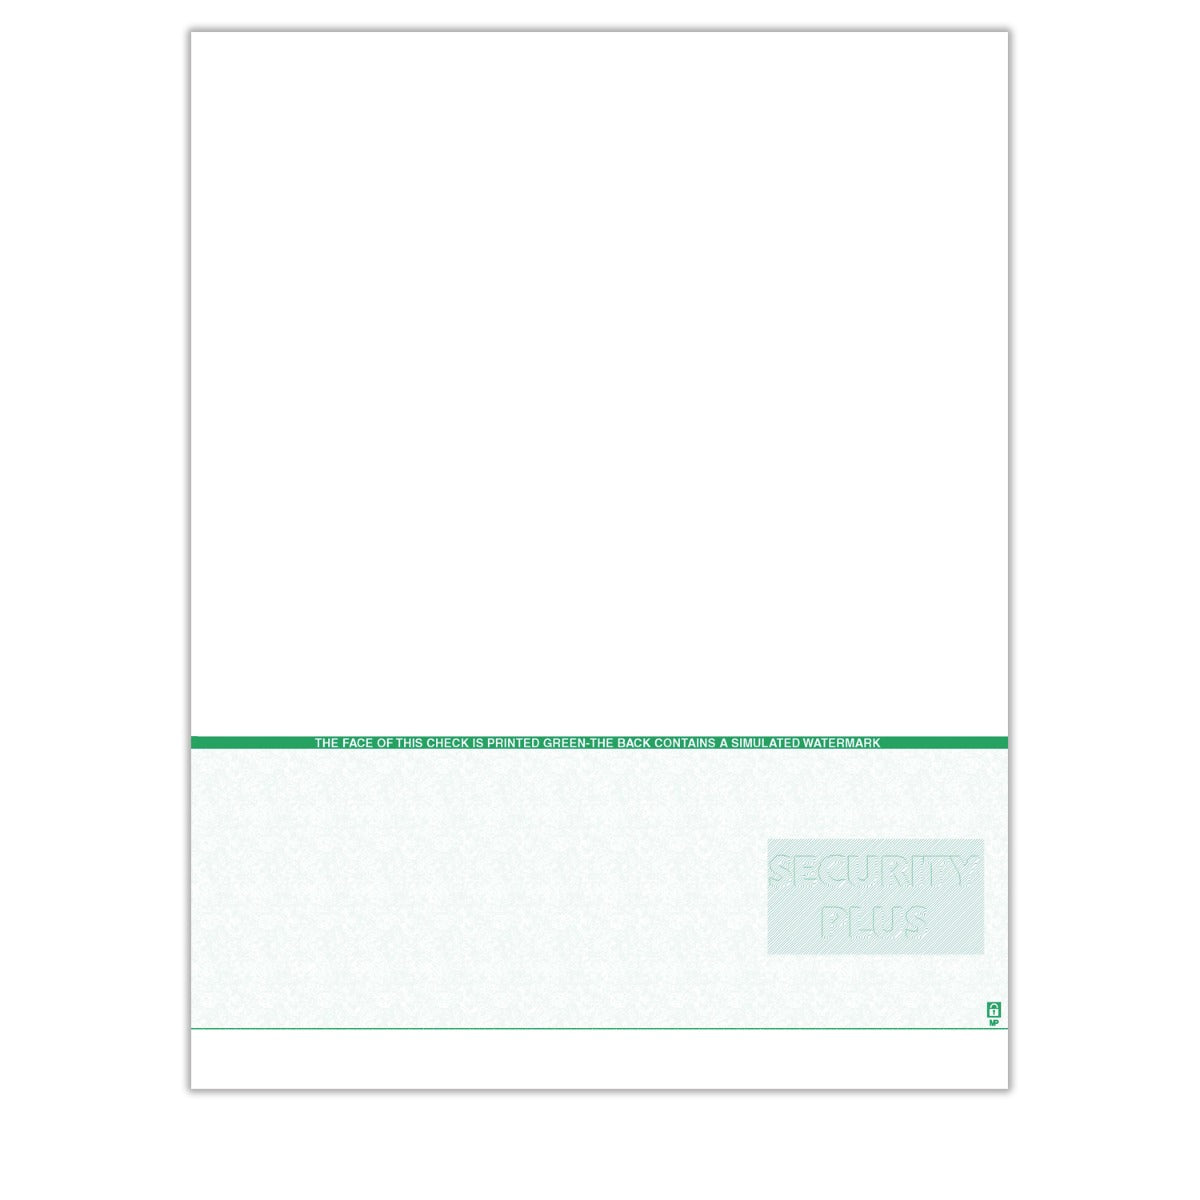 TROY Security Plus Check Paper, Green, Check Bottom, Single Perforation, Ream